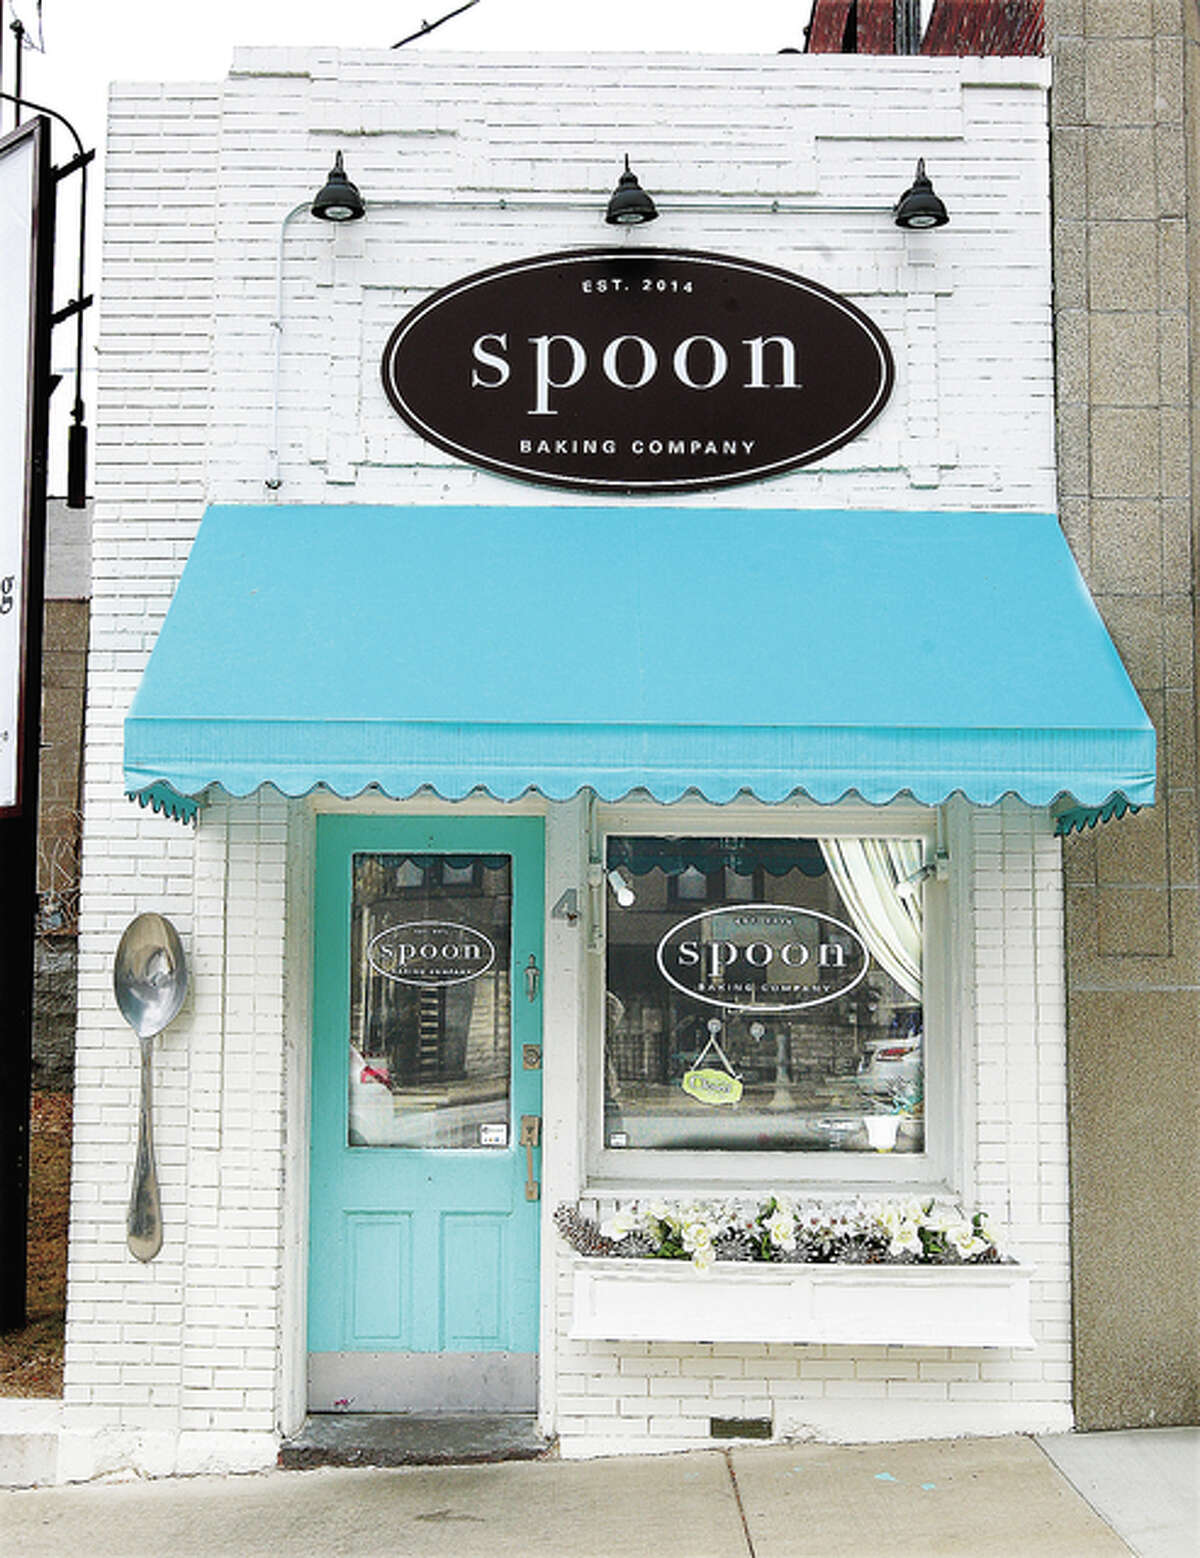 The Spoon Baking Company, established in just 2014, at 4 East Broadway in Alton has been closed since early January.